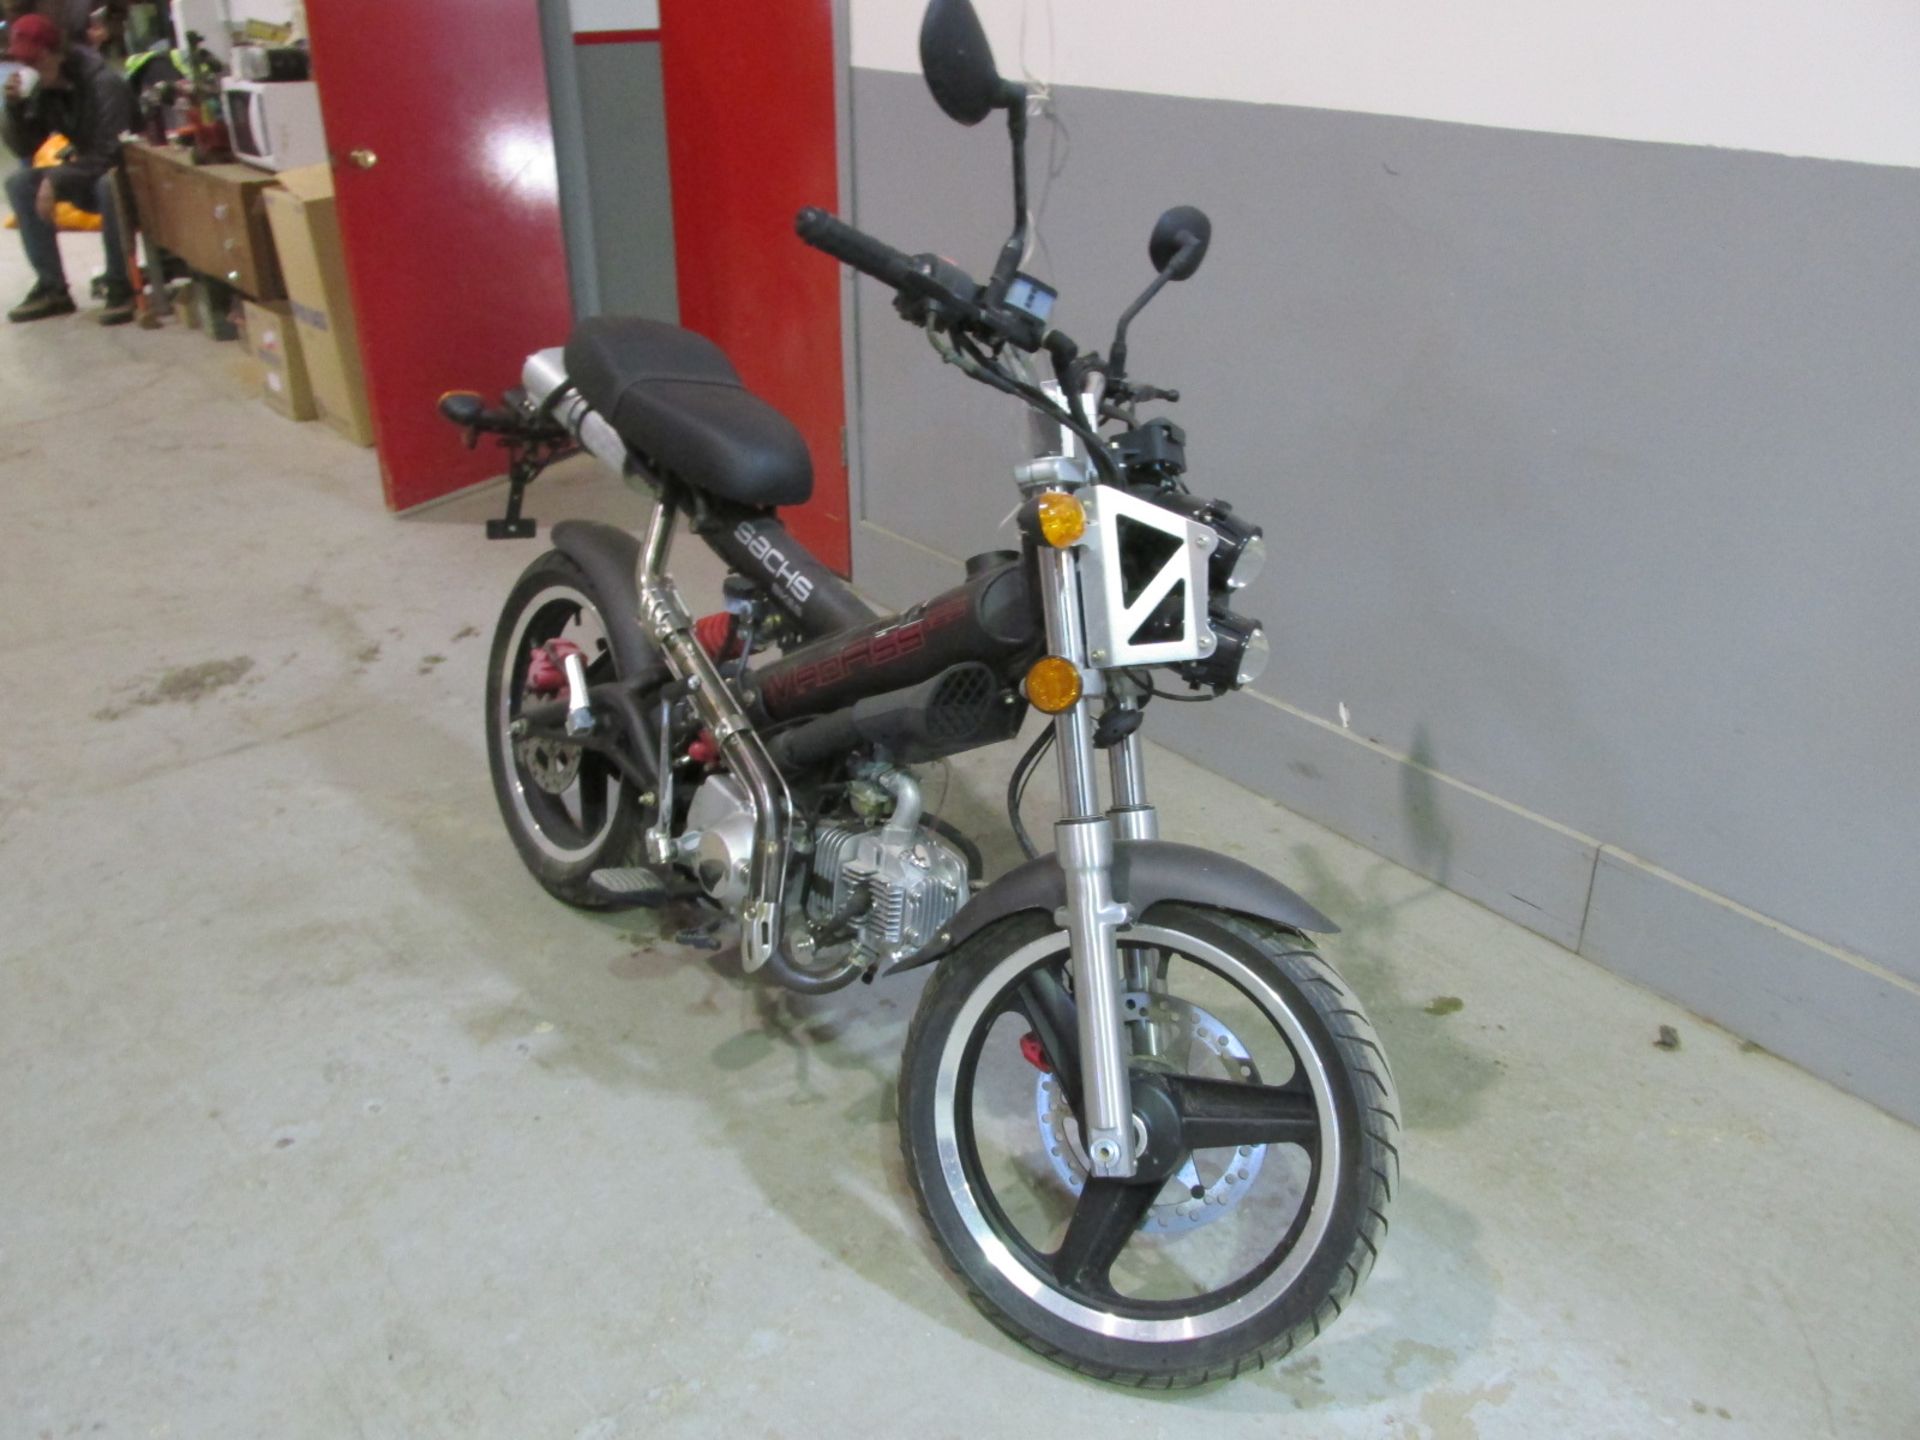 2011 SACHS MADASS 125 BIKE 1 AUTOMATIC SN:LE8PGJLK6B1001043 ODO:7 KM NOT REGISTERED NOTES:NOTE: